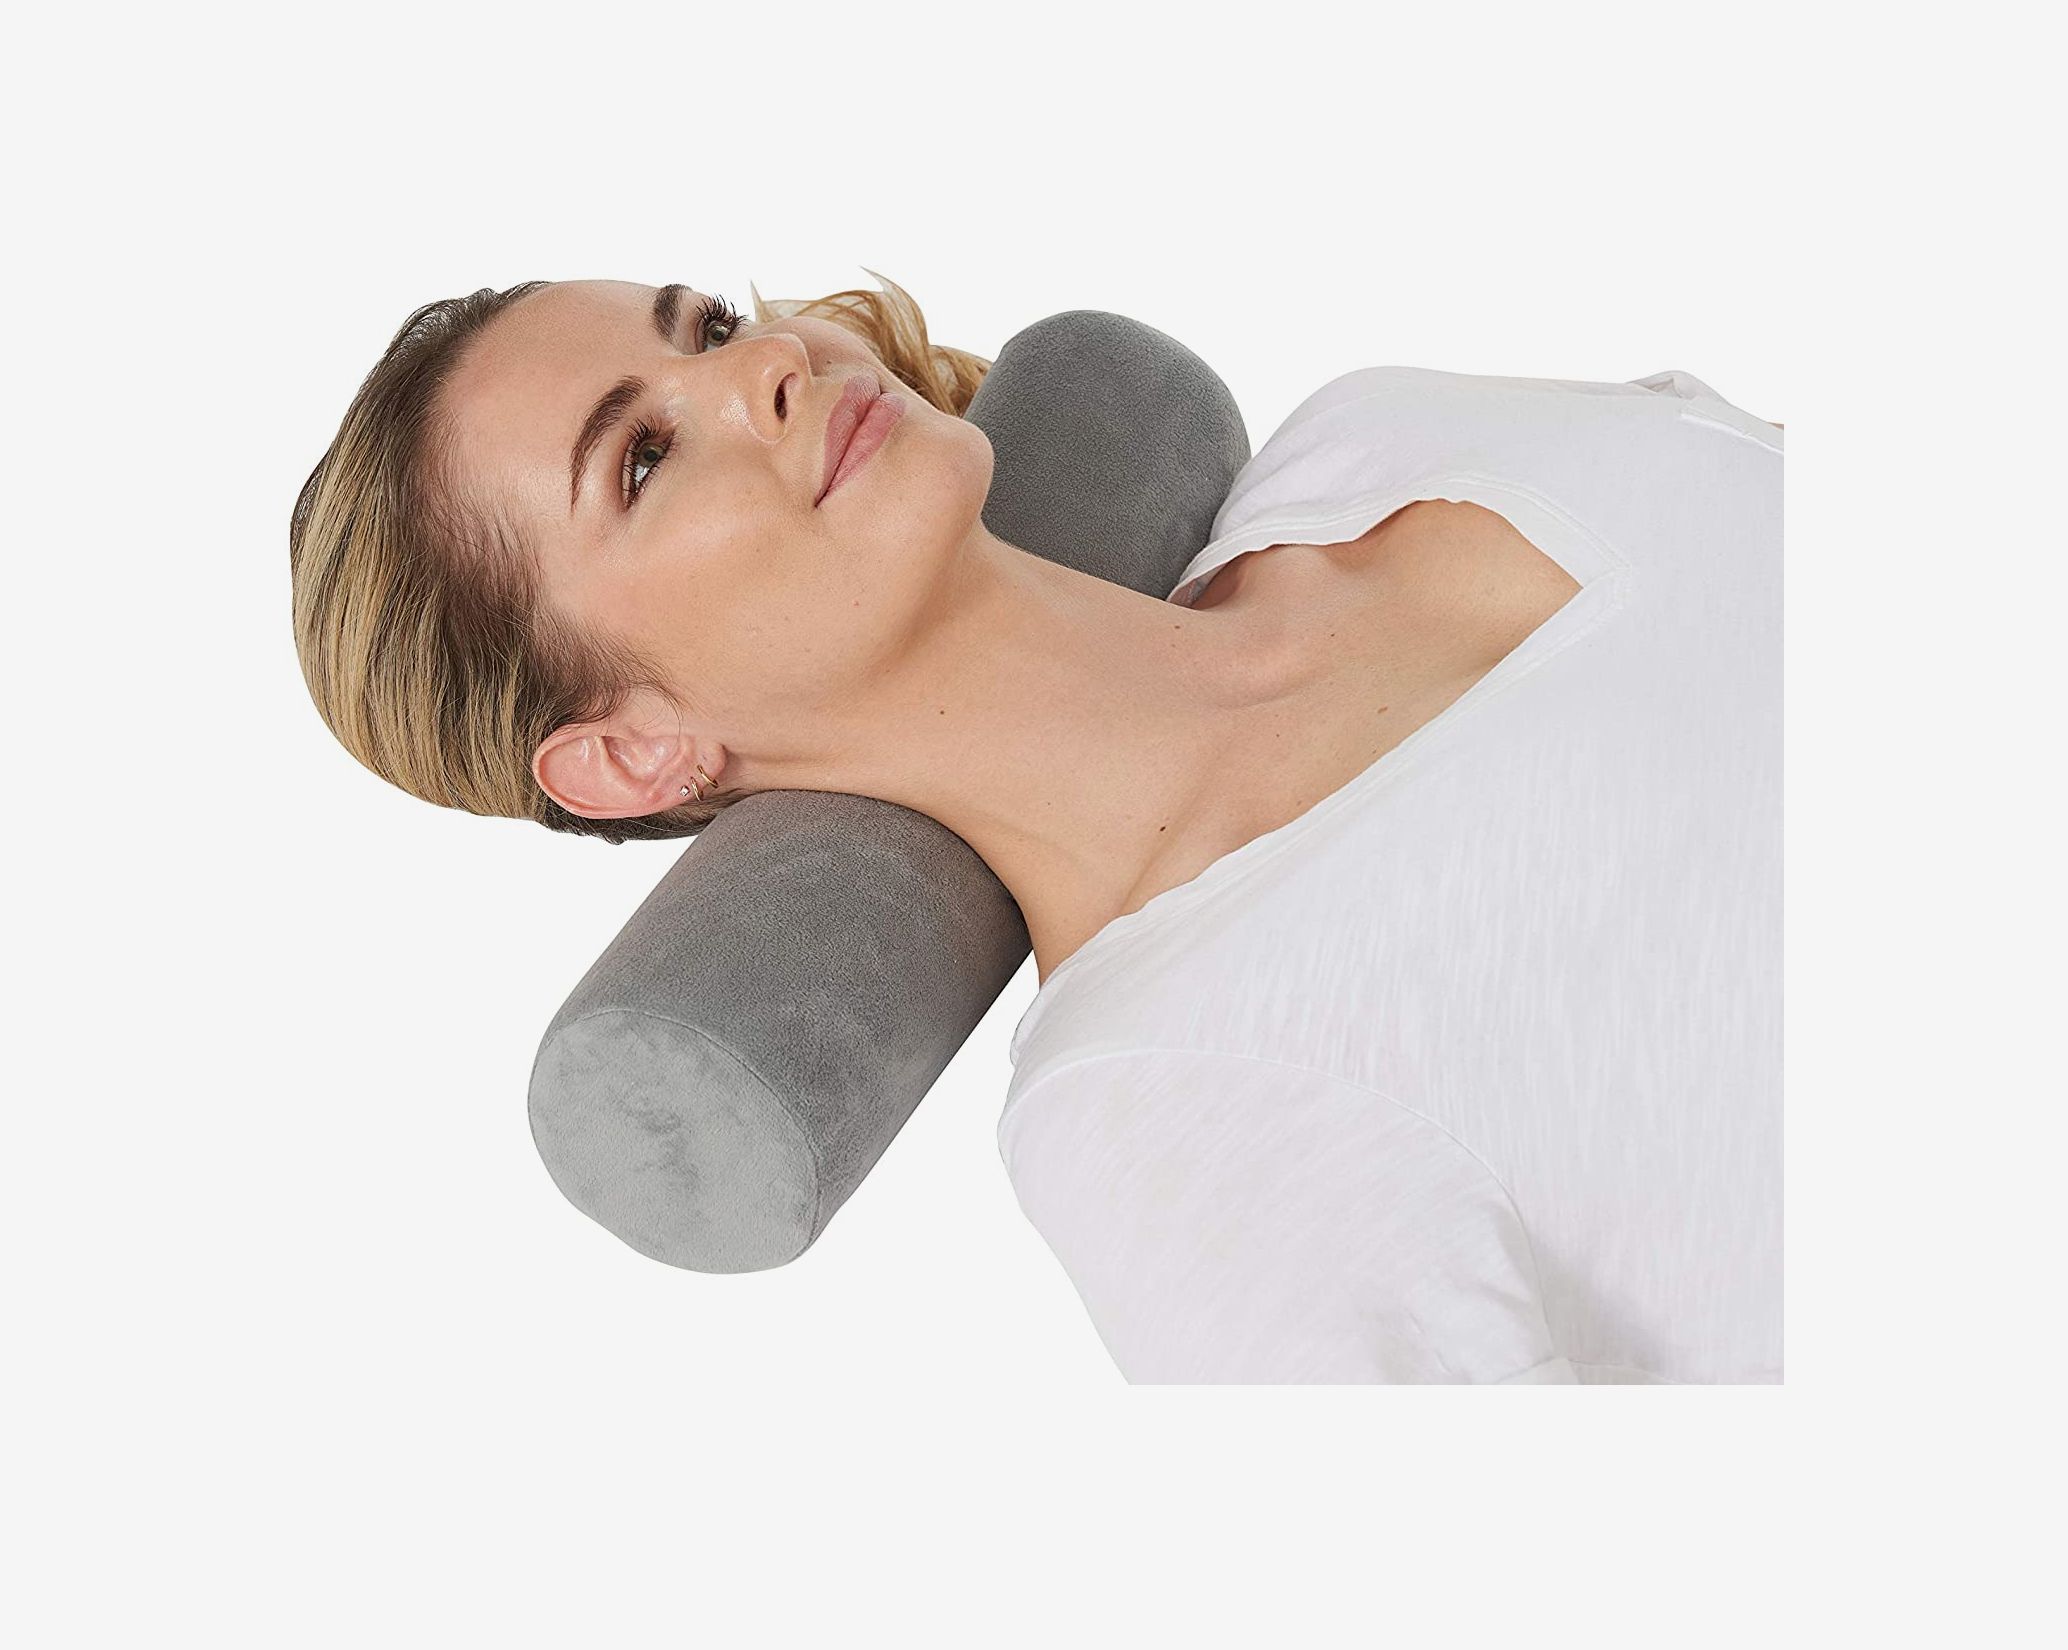 How to Find the Best Pillow for Back and Neck Pain